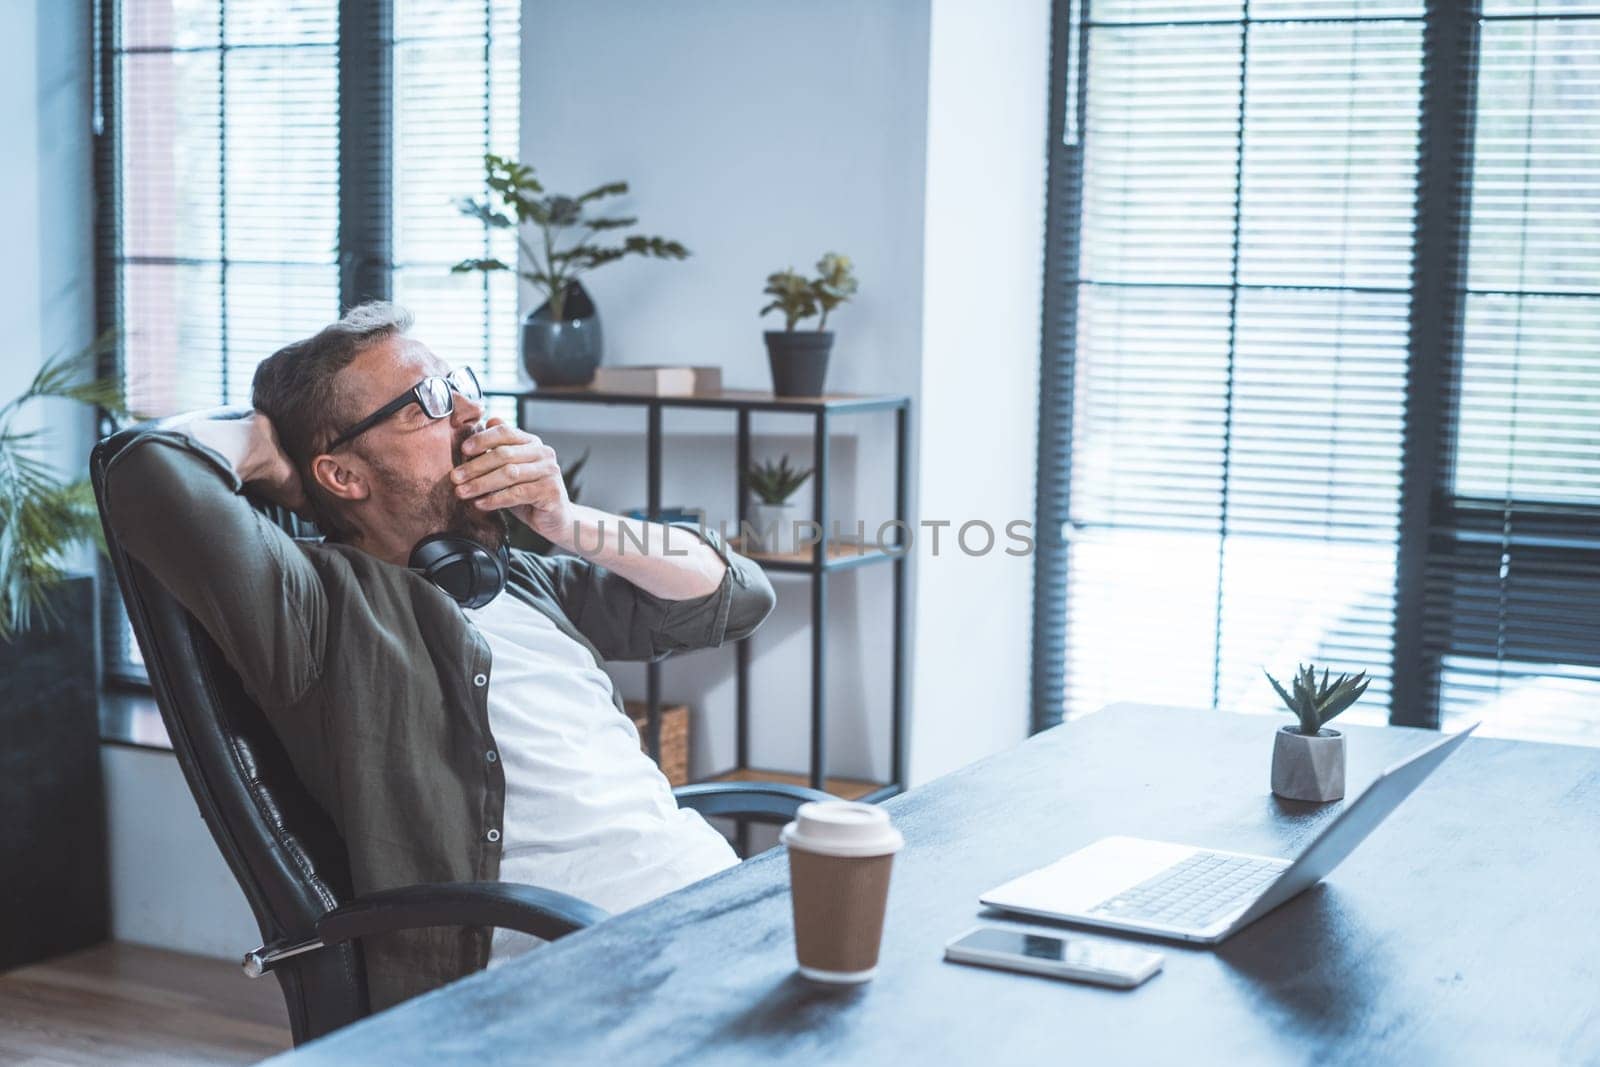 Tired and overworked office worker sitting at desk in office, working on notebook. Worker appears exhausted and bored, likely due stress and fatigue of meeting work deadlines and multitasking. High quality photo